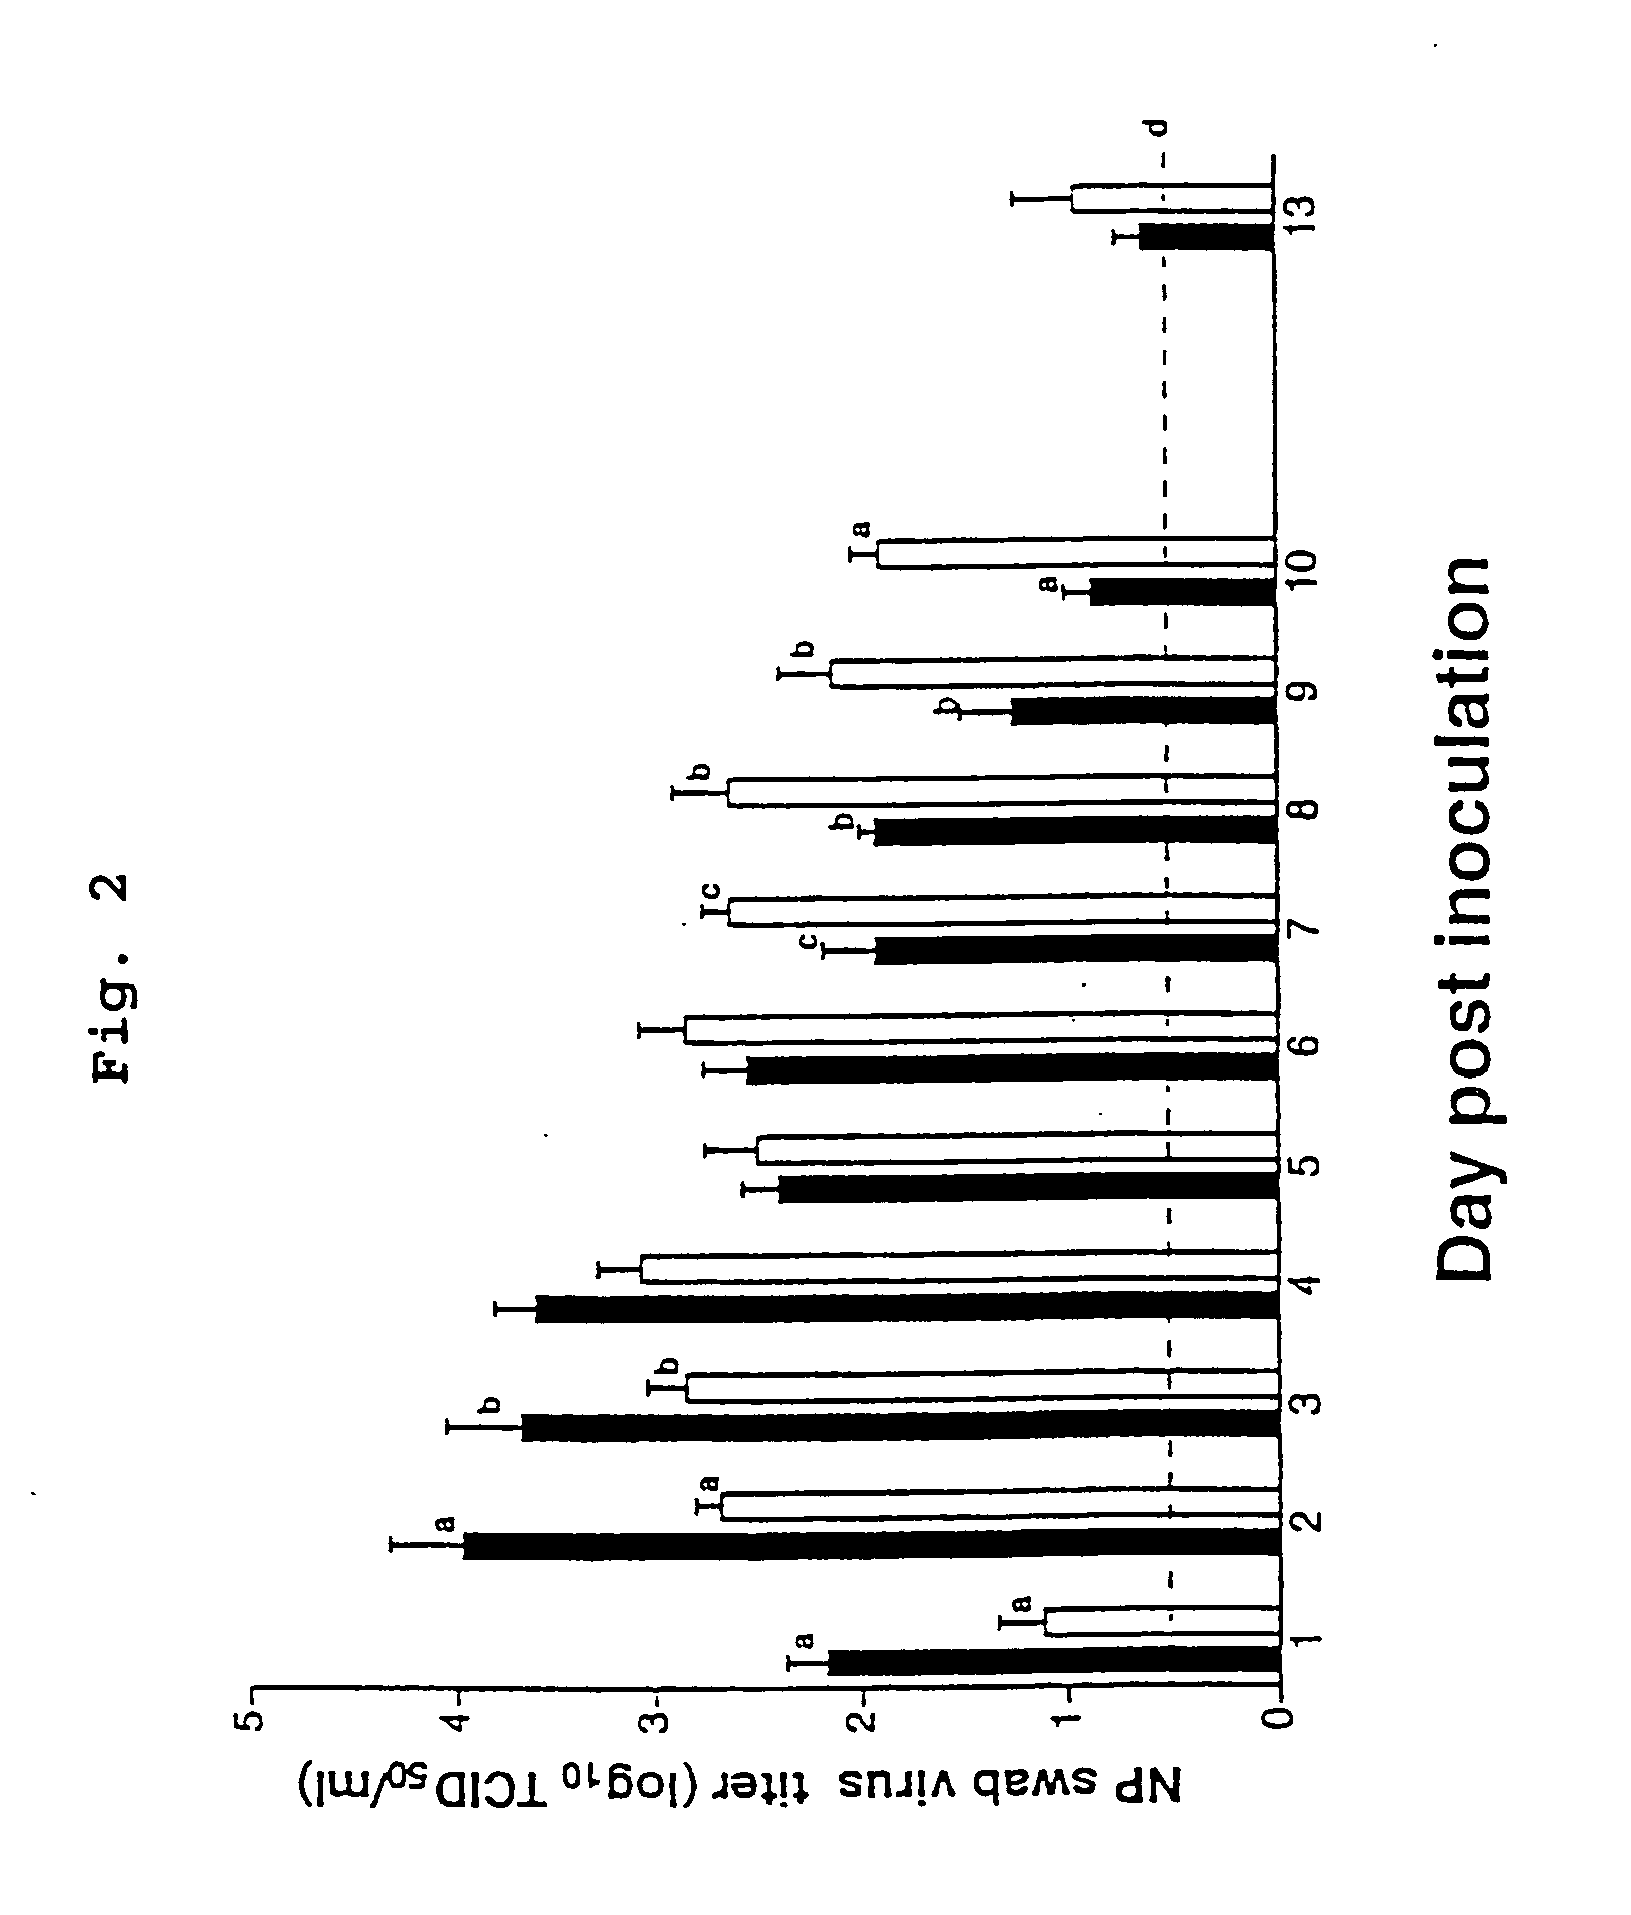 Production of attenuated negative stranded RNA virus vaccines from cloned nucleotide sequences